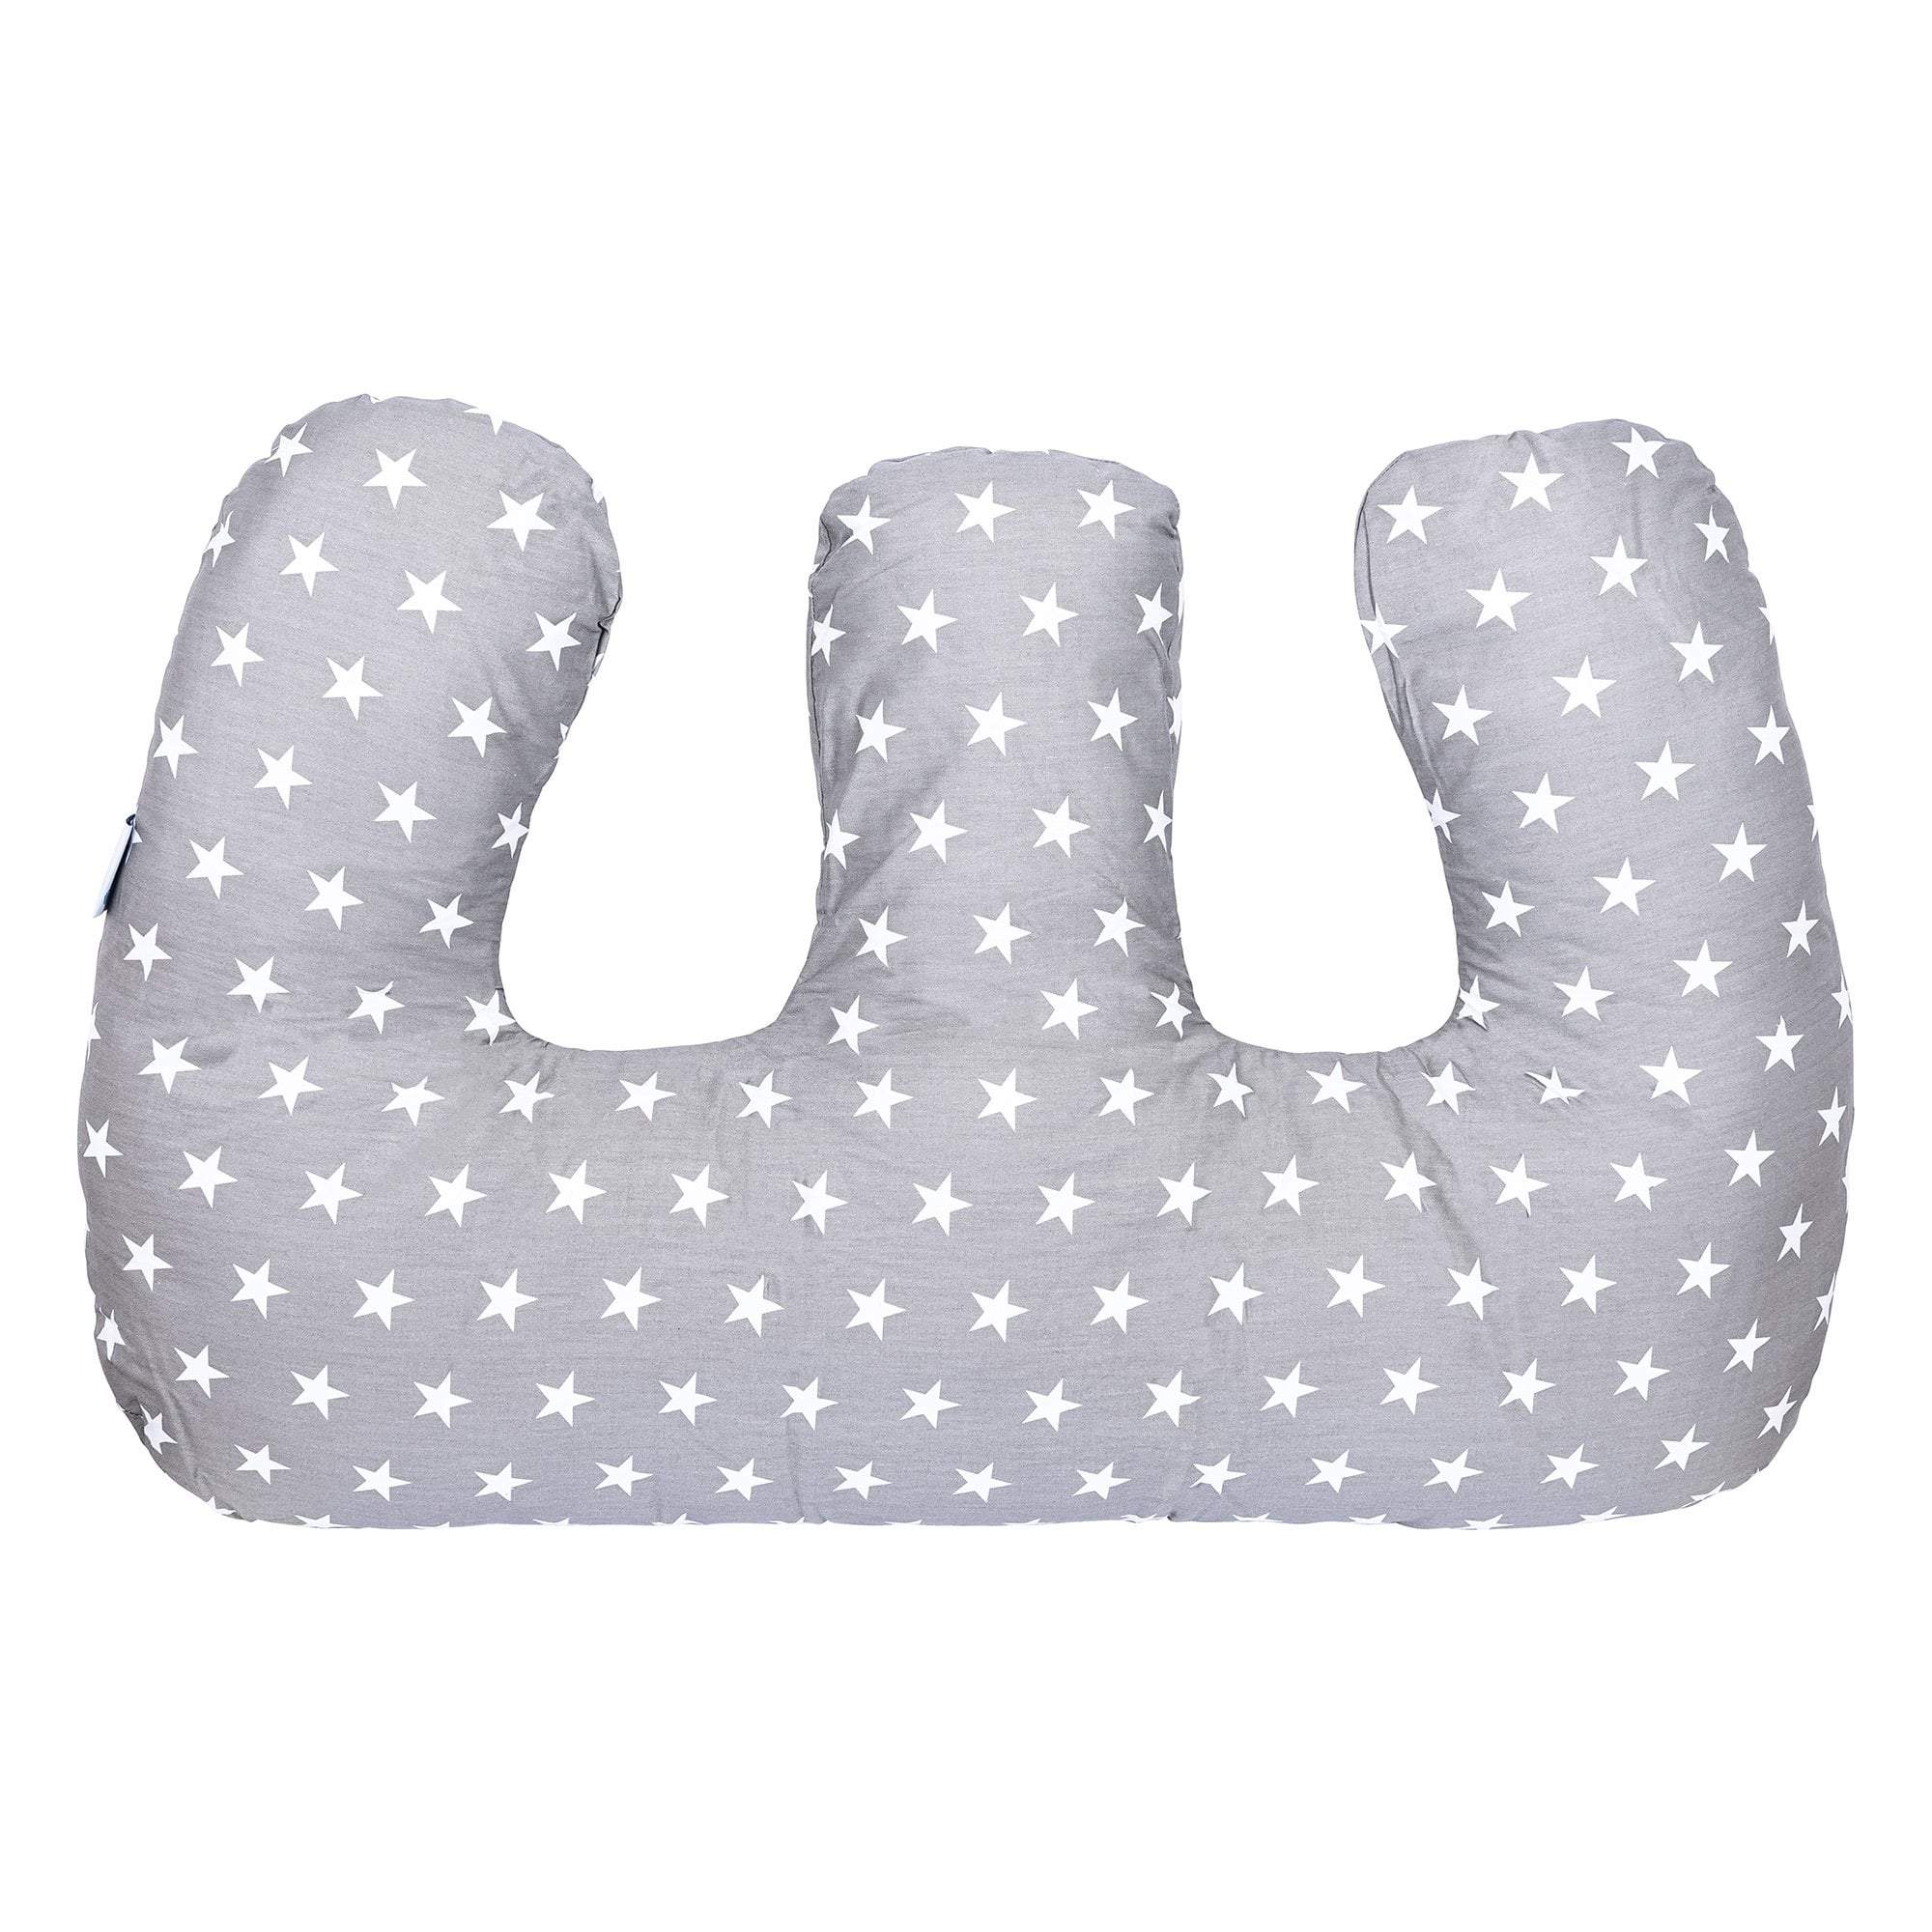 Twin Pregnancy Nursing Pillow - White Stars - For Your Little One